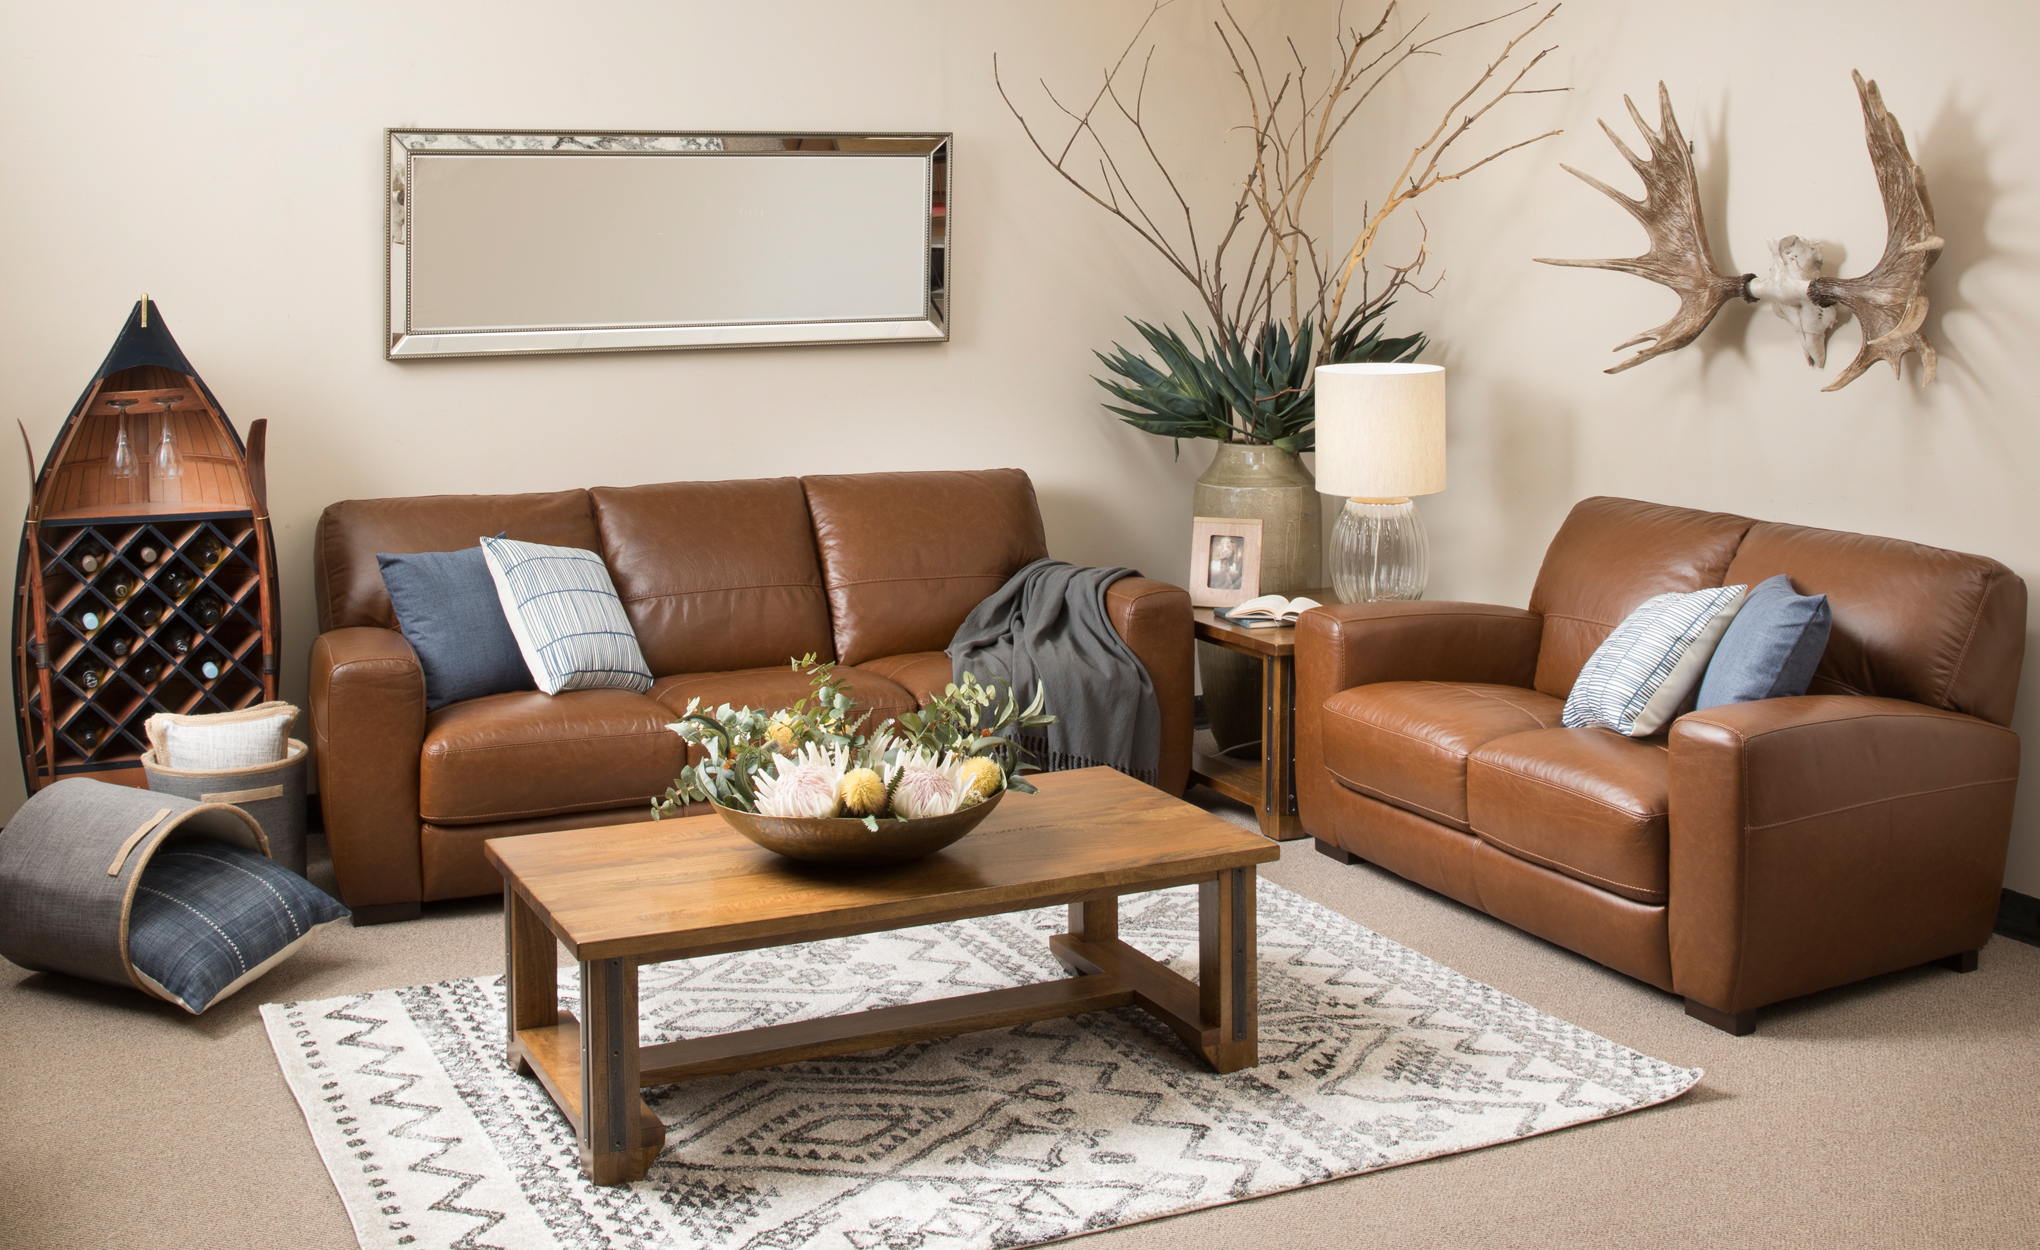 The Leather Vs Fabric Sofa Debate By, Which Sofa Is Better Leather Or Fabric